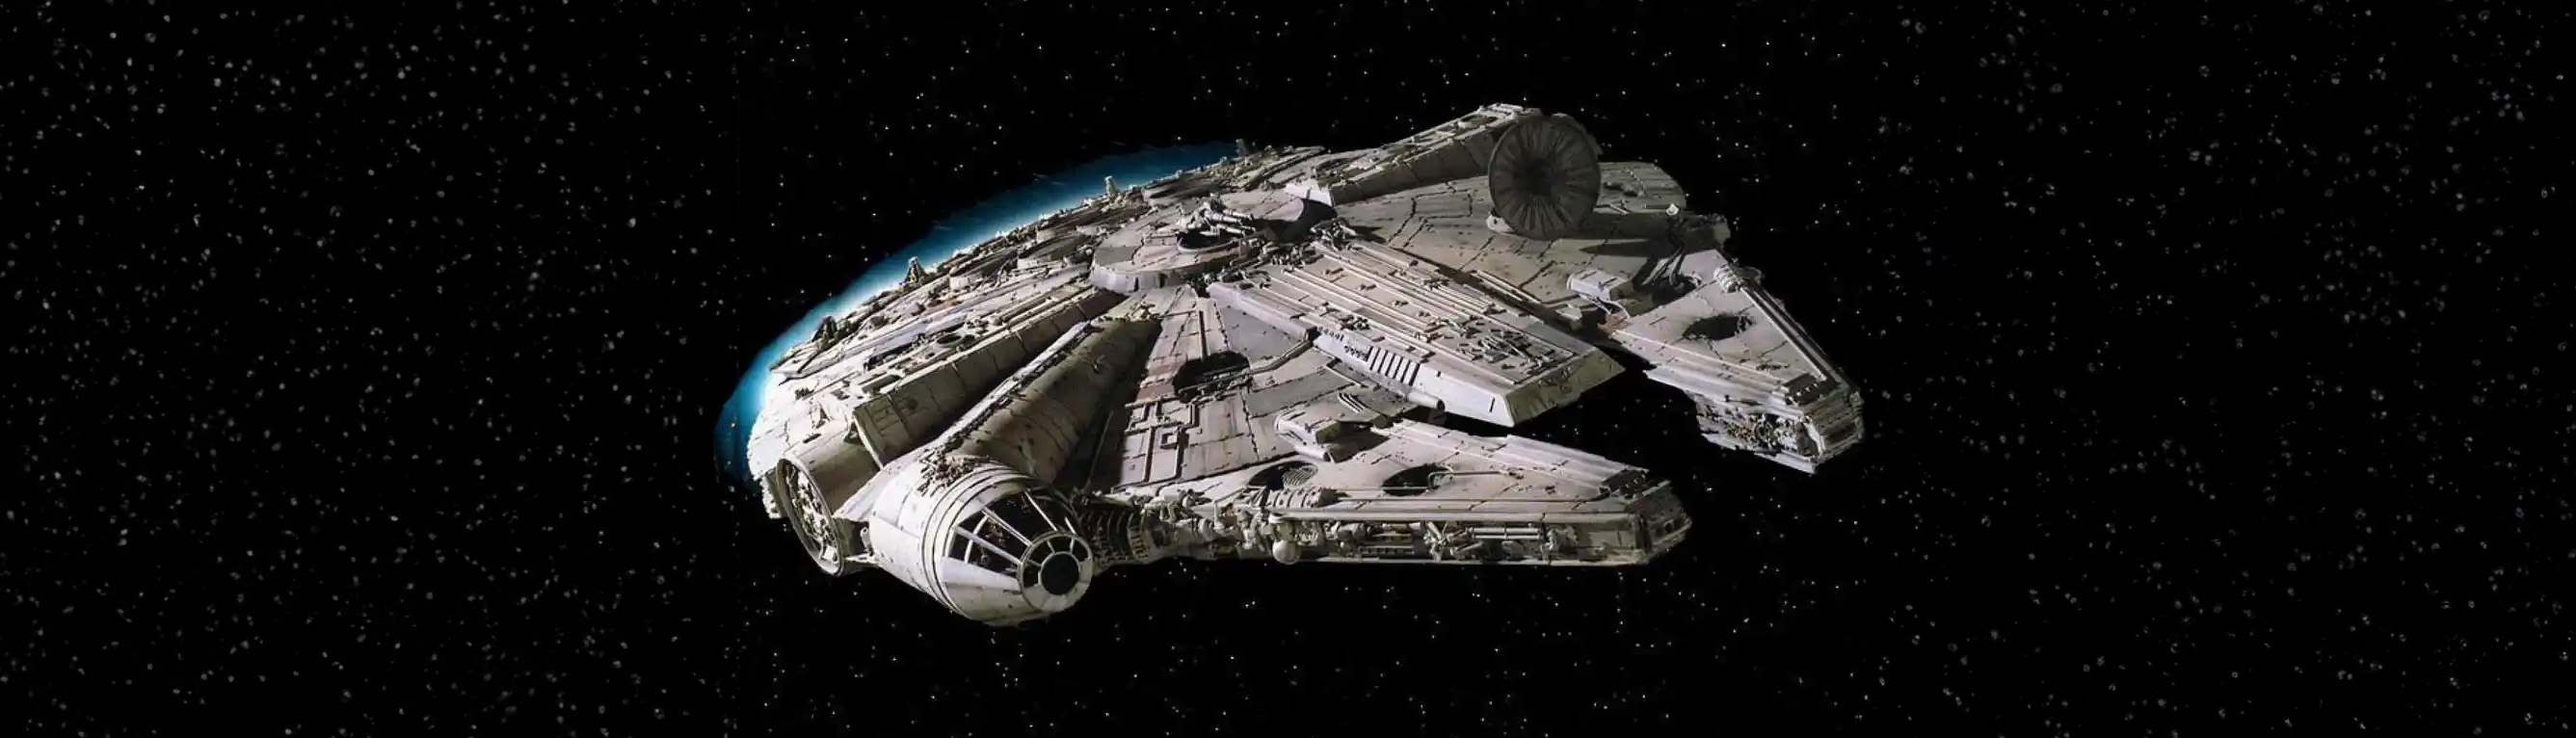 A Short History of the Millenium Falcon